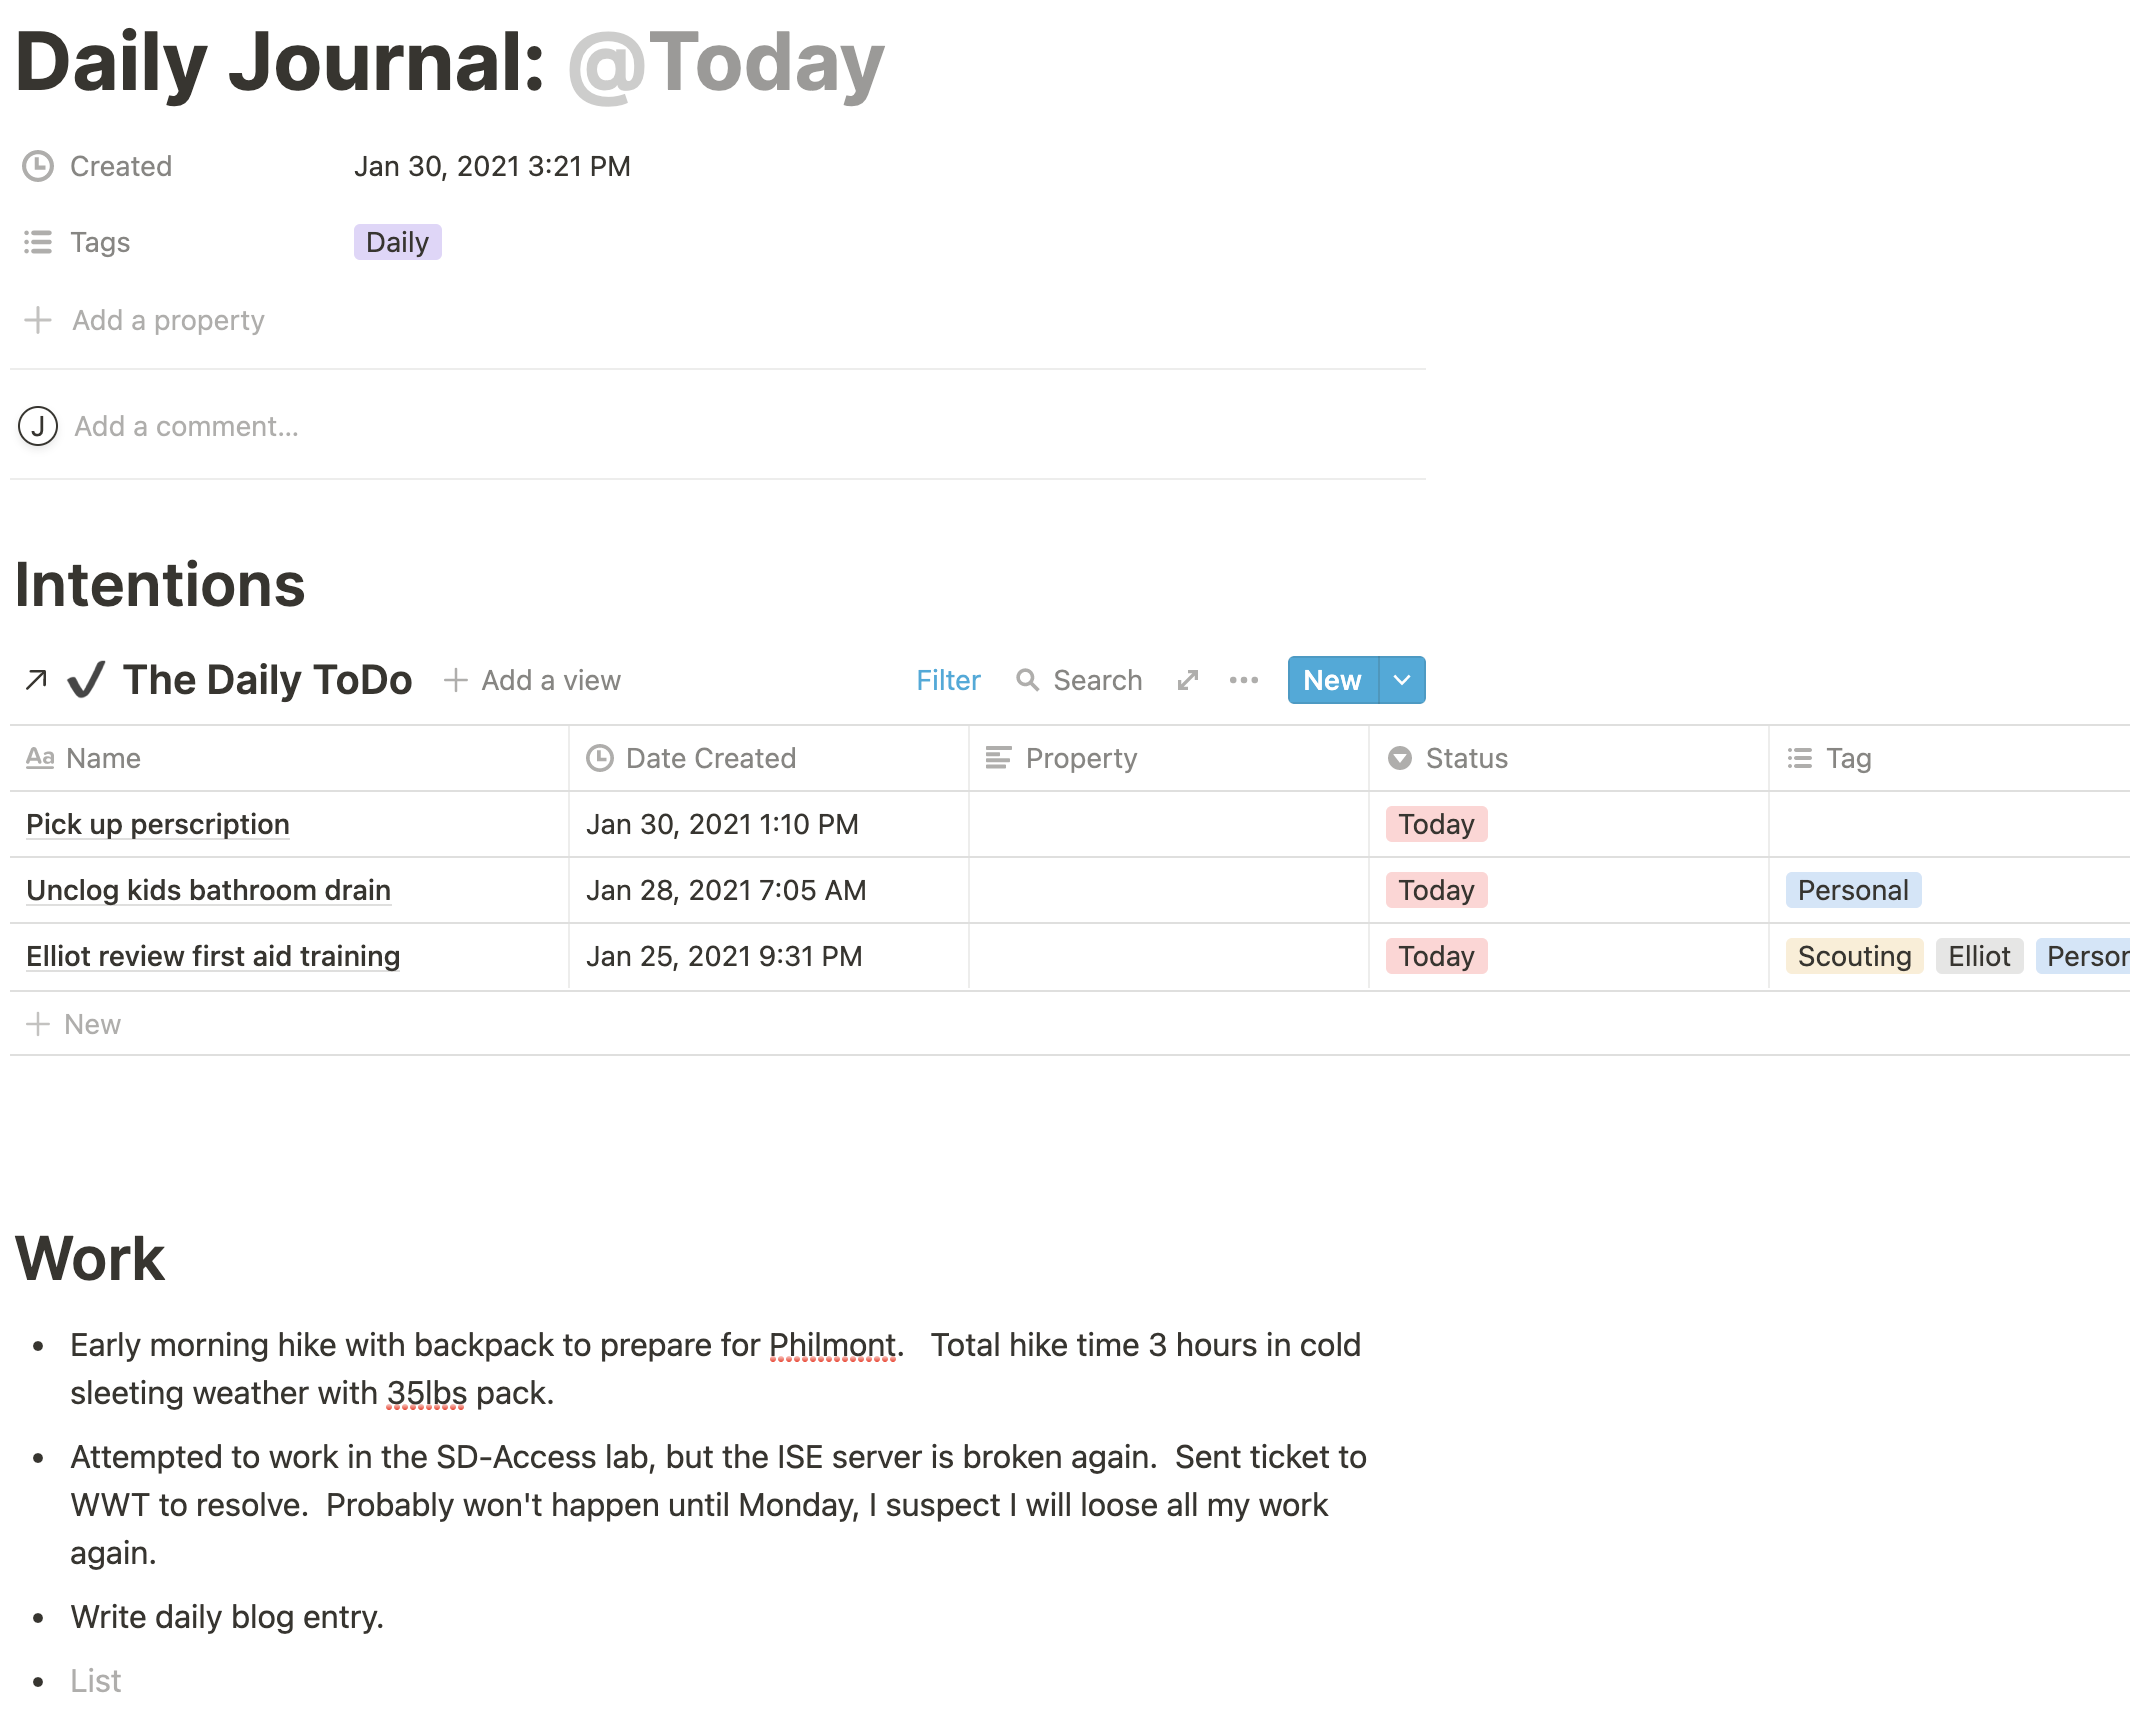 Image of Notion daily journal page with embedded todo list